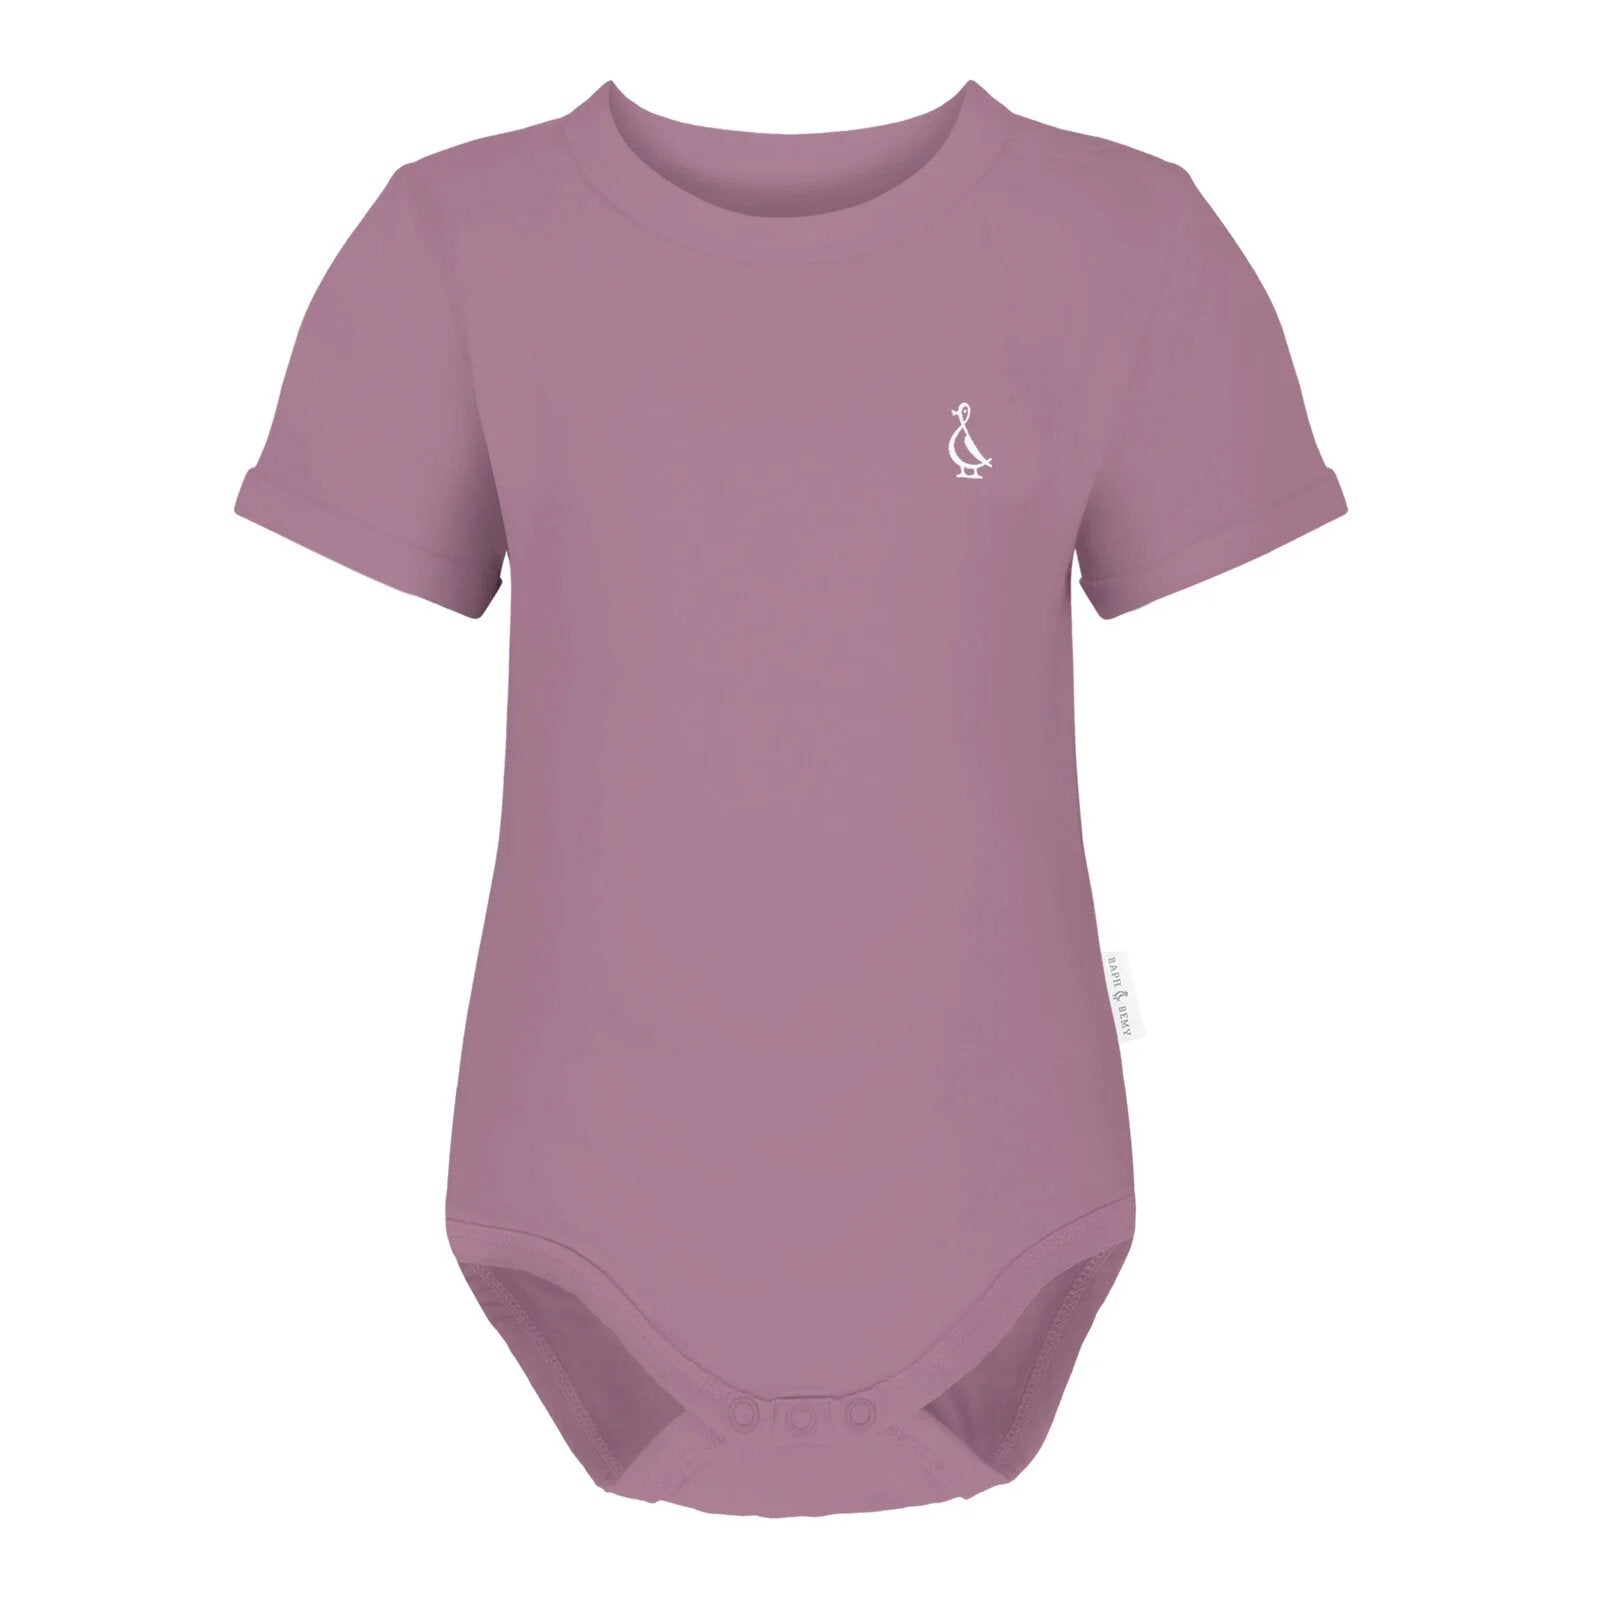 Raph&Remy Premium Bamboo Onesies - 12-18 months